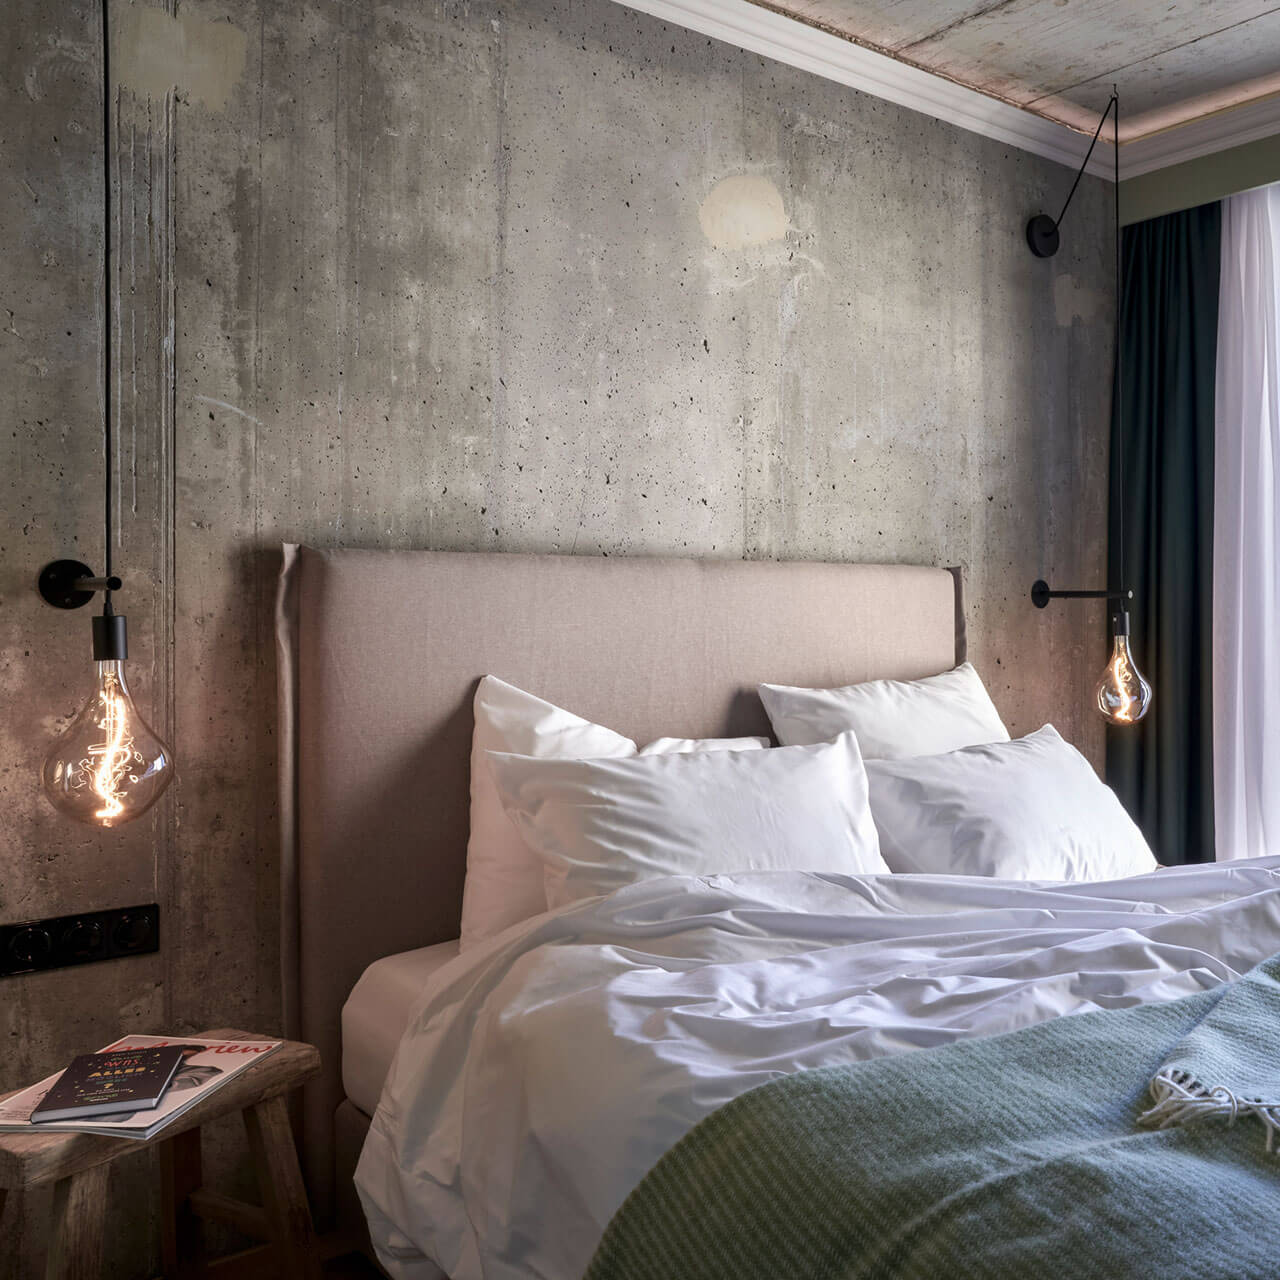 cozy bed, urban concrete walls and warm lights